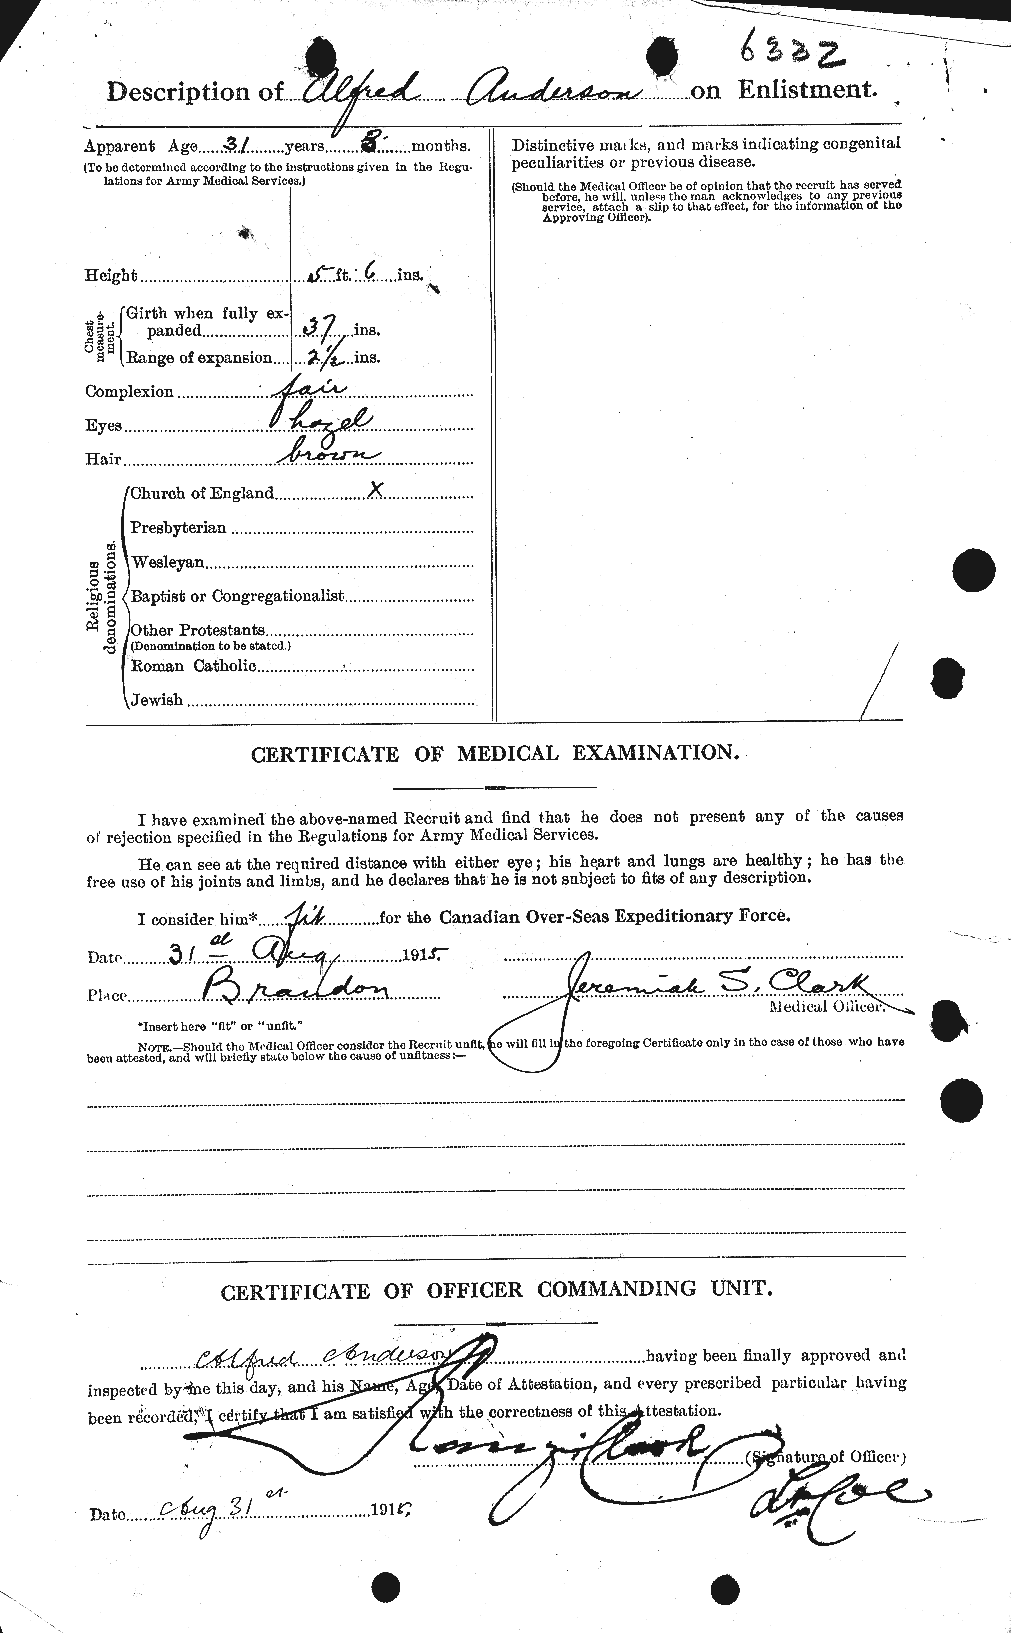 Personnel Records of the First World War - CEF 209461b